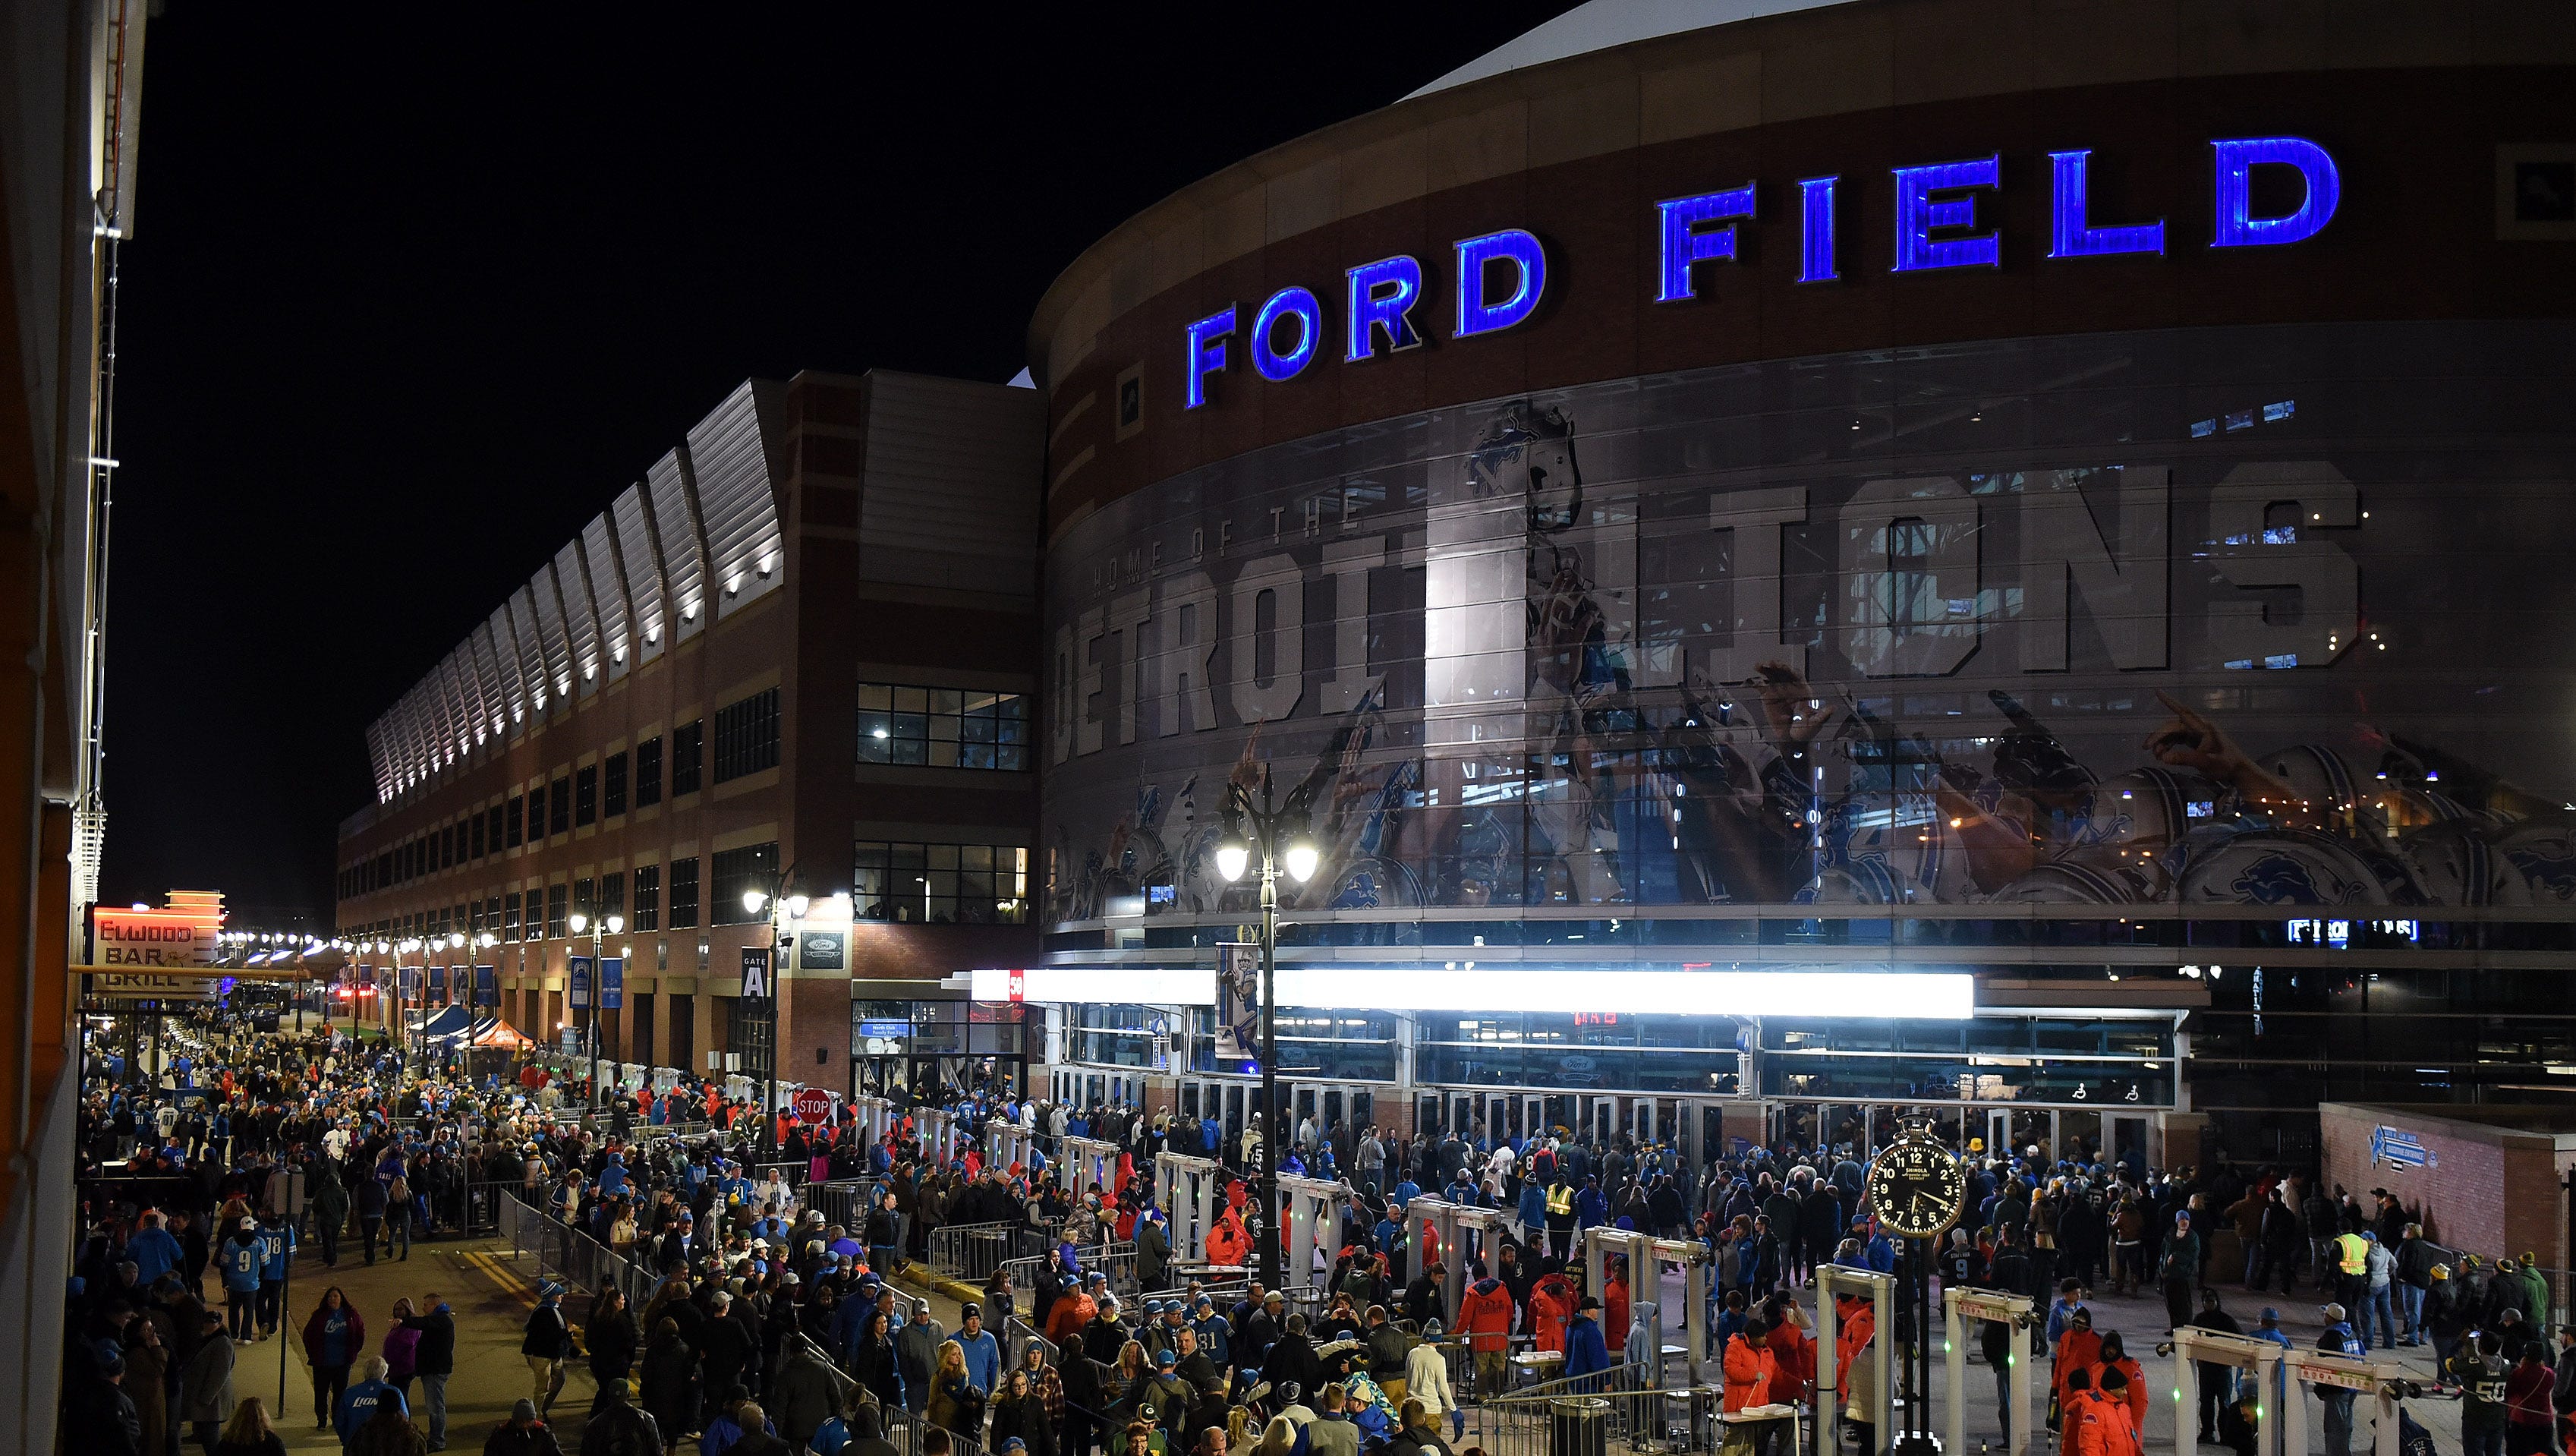 The Lions showed off the upgrades to Ford Field during Roger Goodell's visit on Tuesday.